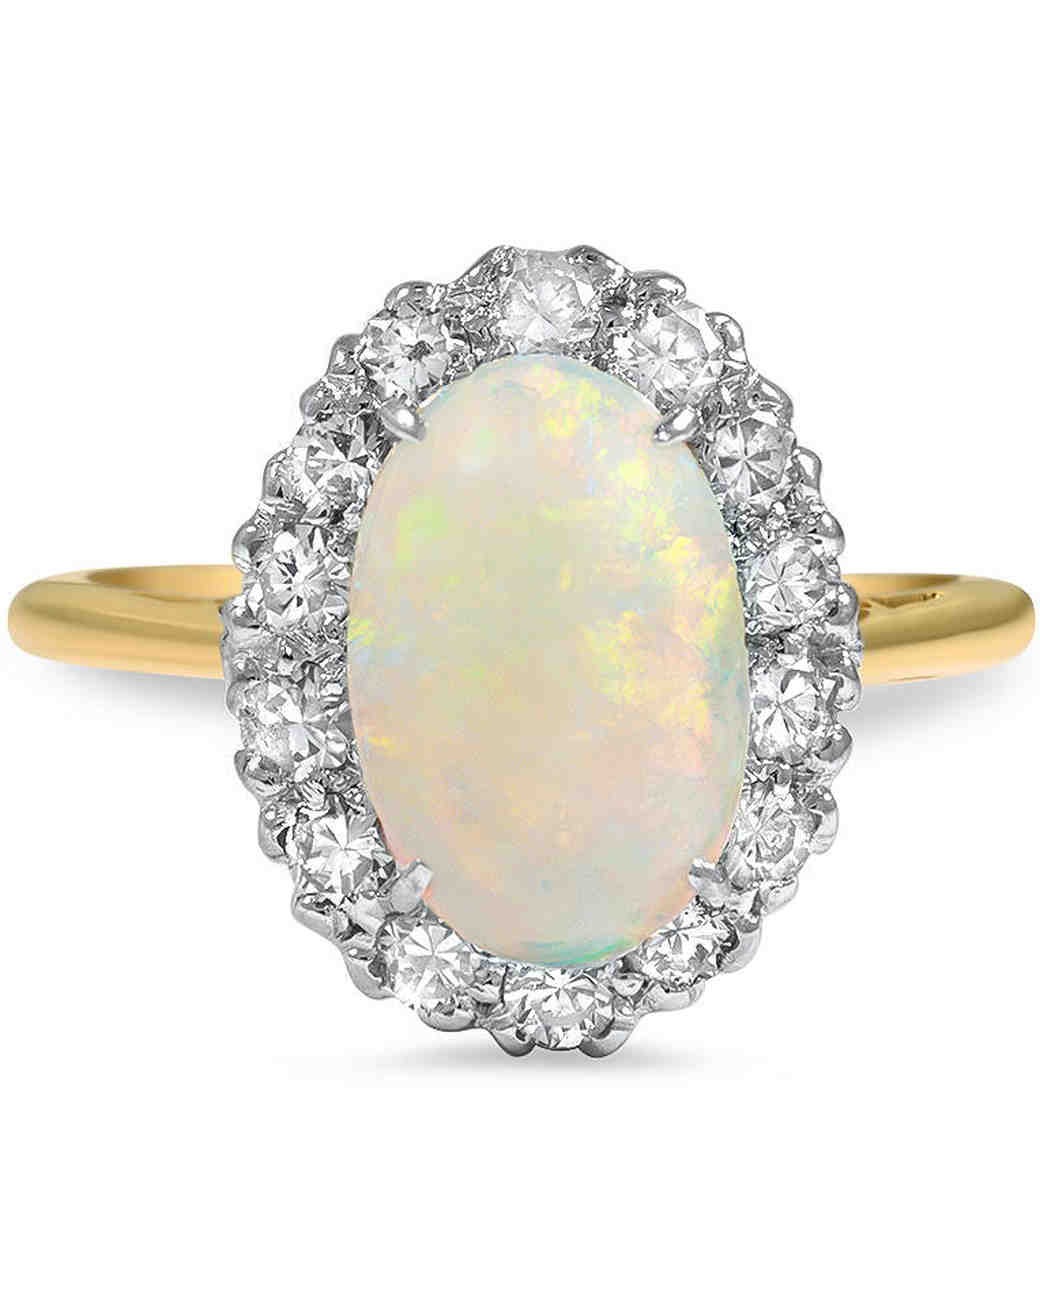 Opal Engagement Rings That Are Oh-So Dreamy | Martha Stewart Weddings